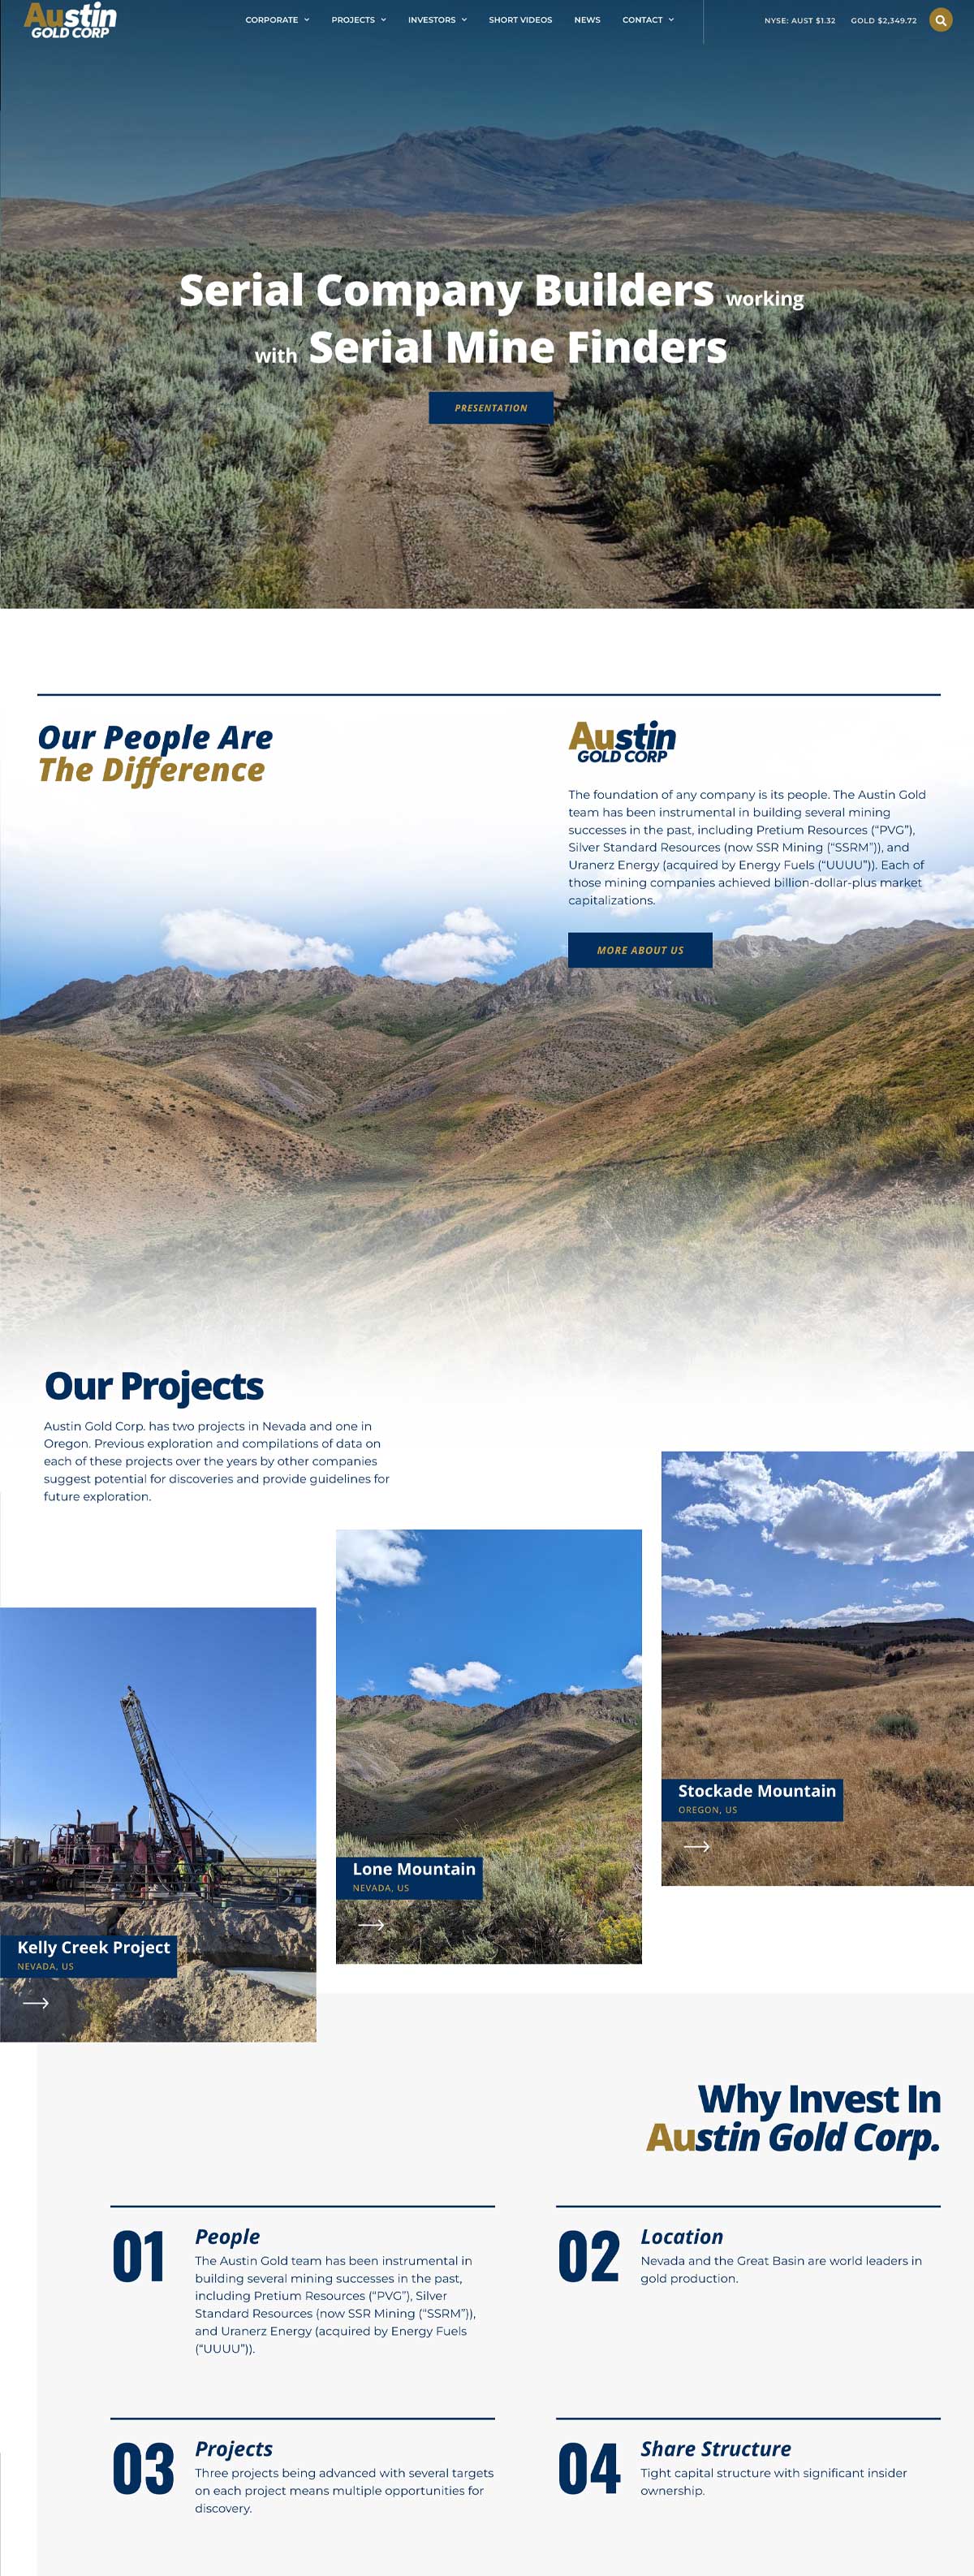 Website Redesign Of Austin Gold Corp Home Page Part 1